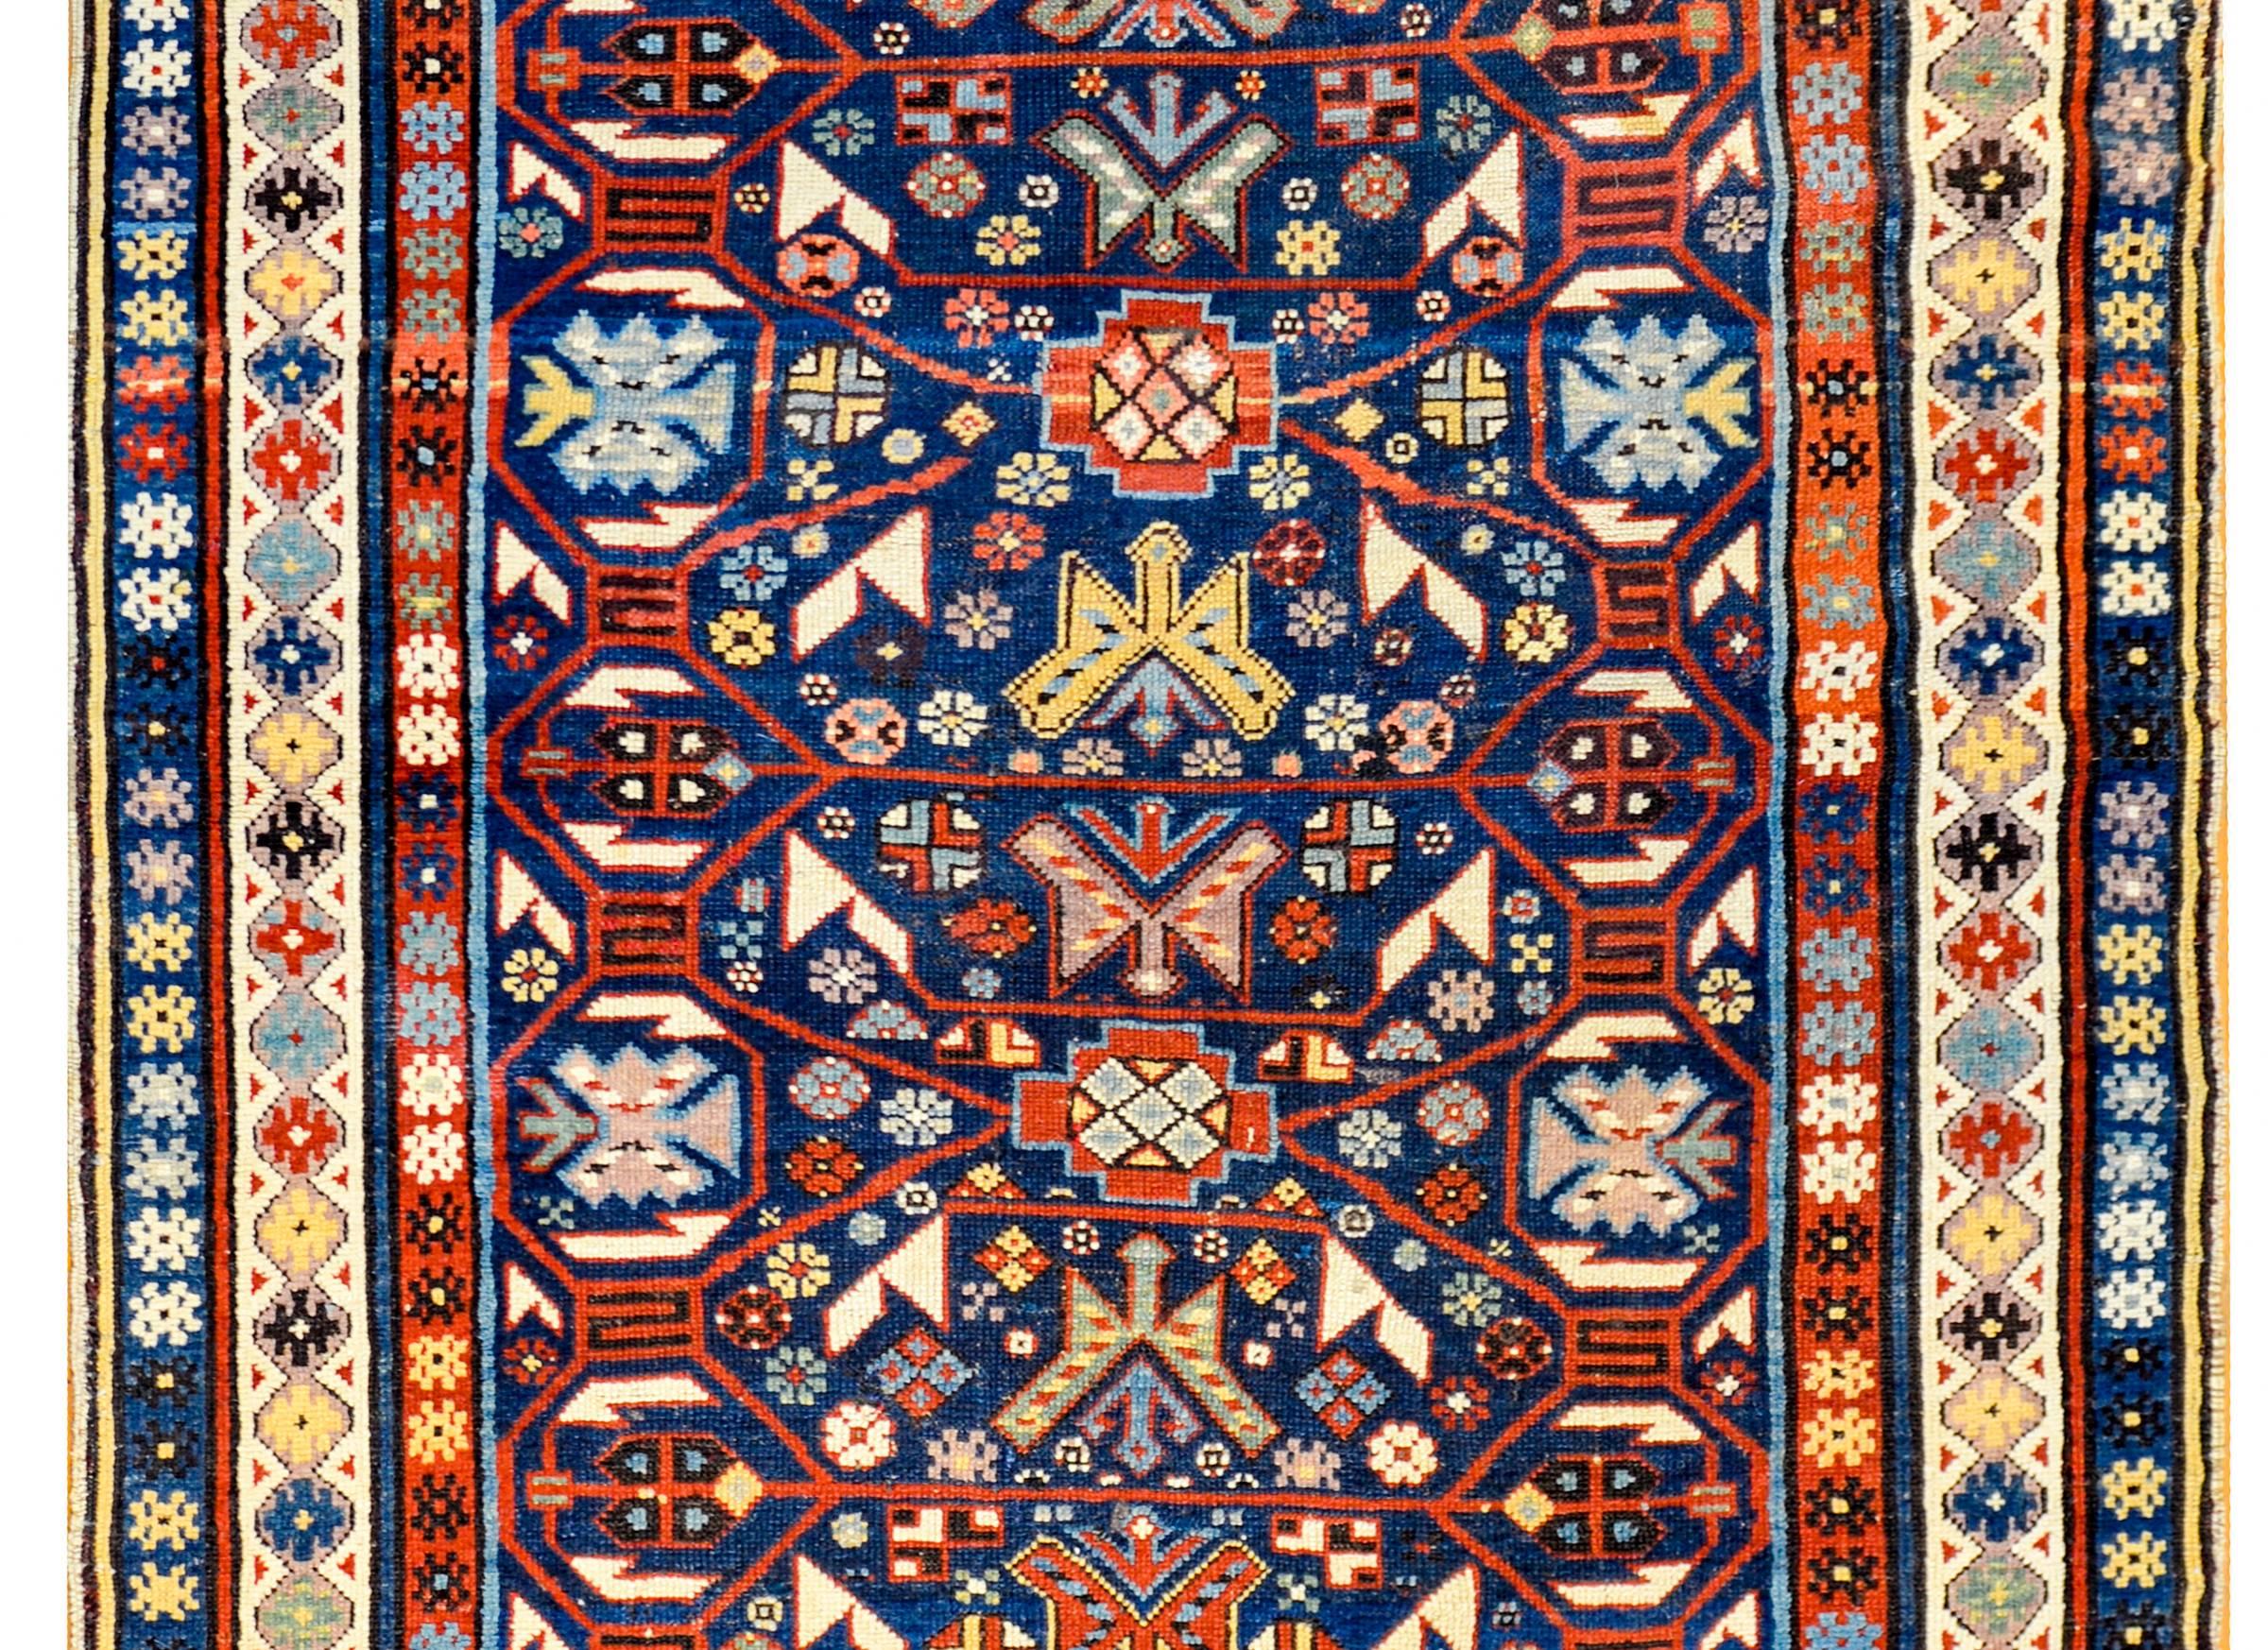 An incredible c 1900 Derbend rug with a densely woven all-over multicolored stylized floral pattern with a beautiful lacy crimson lattice overlaying the dark indigo background. The border is wonderful, with three different stylized flower patterned